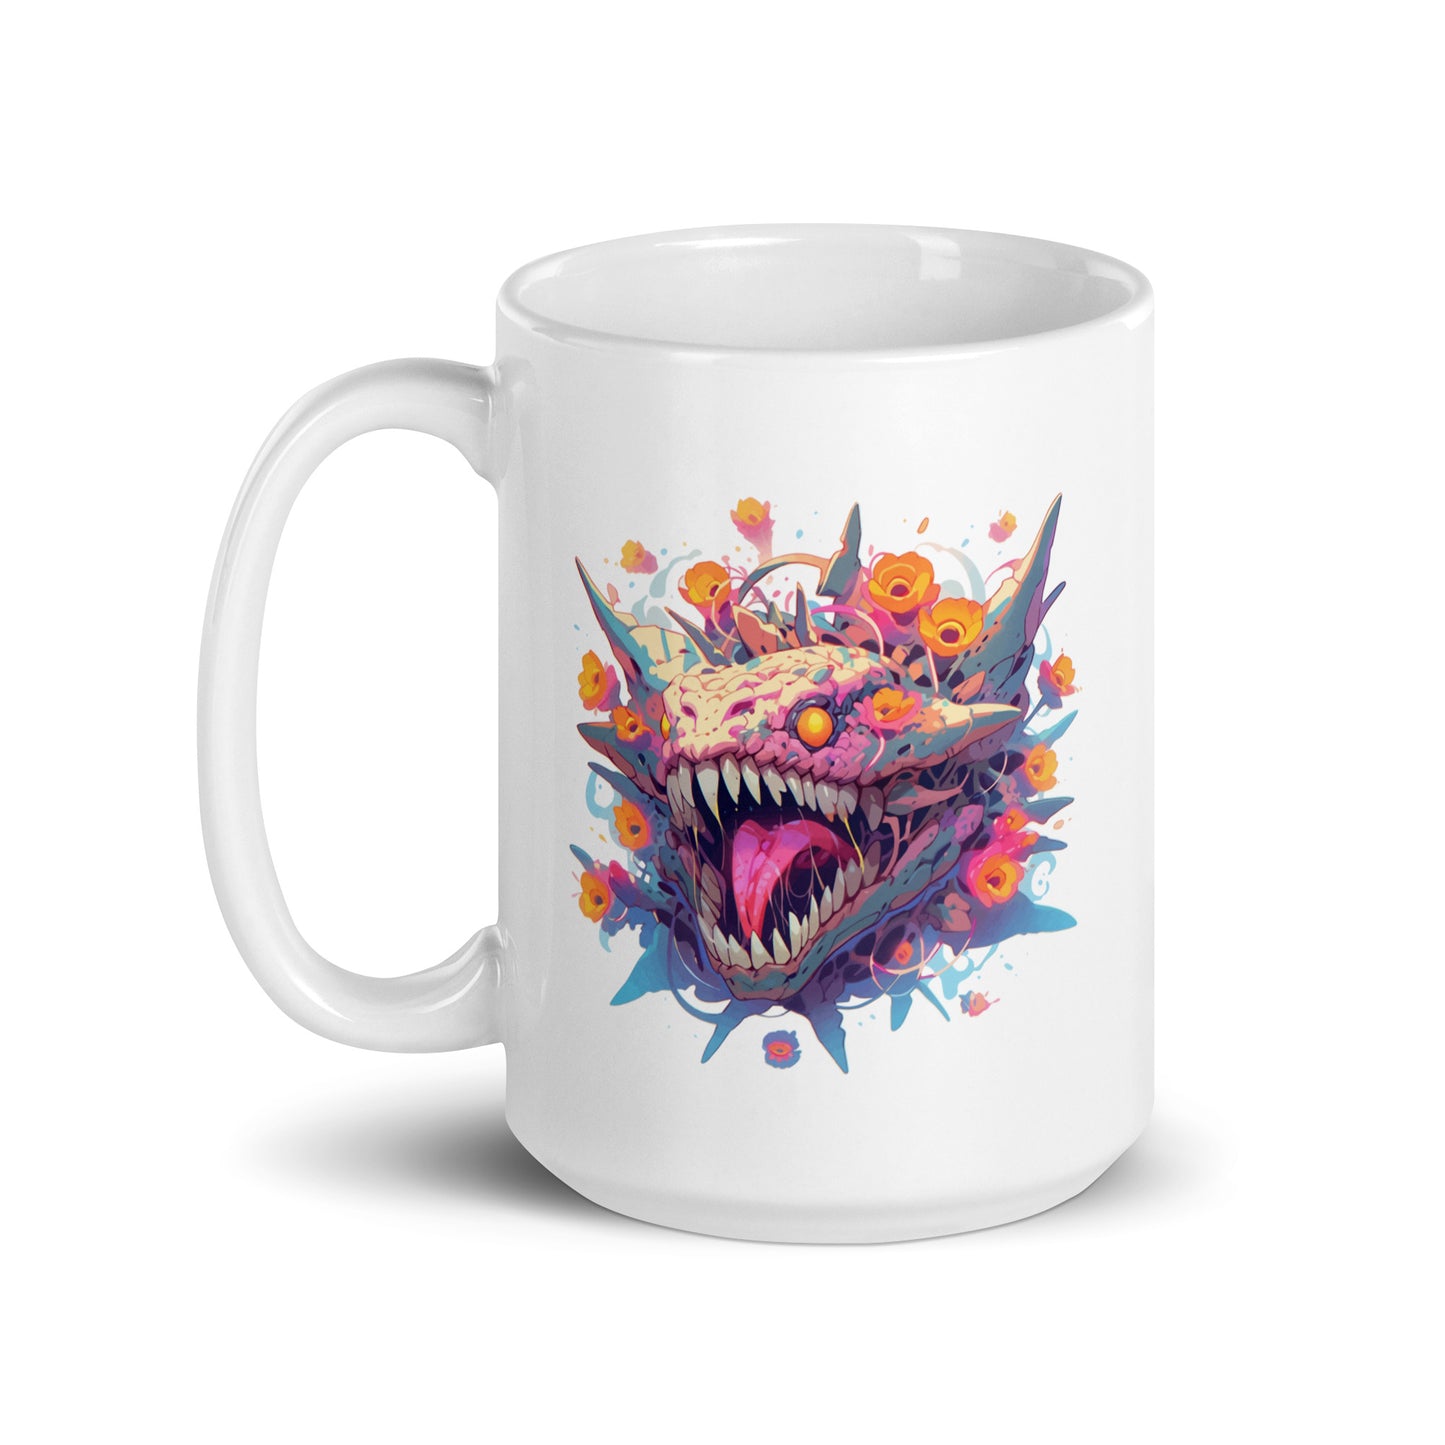 Colorful crazy monster illustration, Orange evil eyes, Mutant with sharp horns and fangs in flowers - White glossy mug